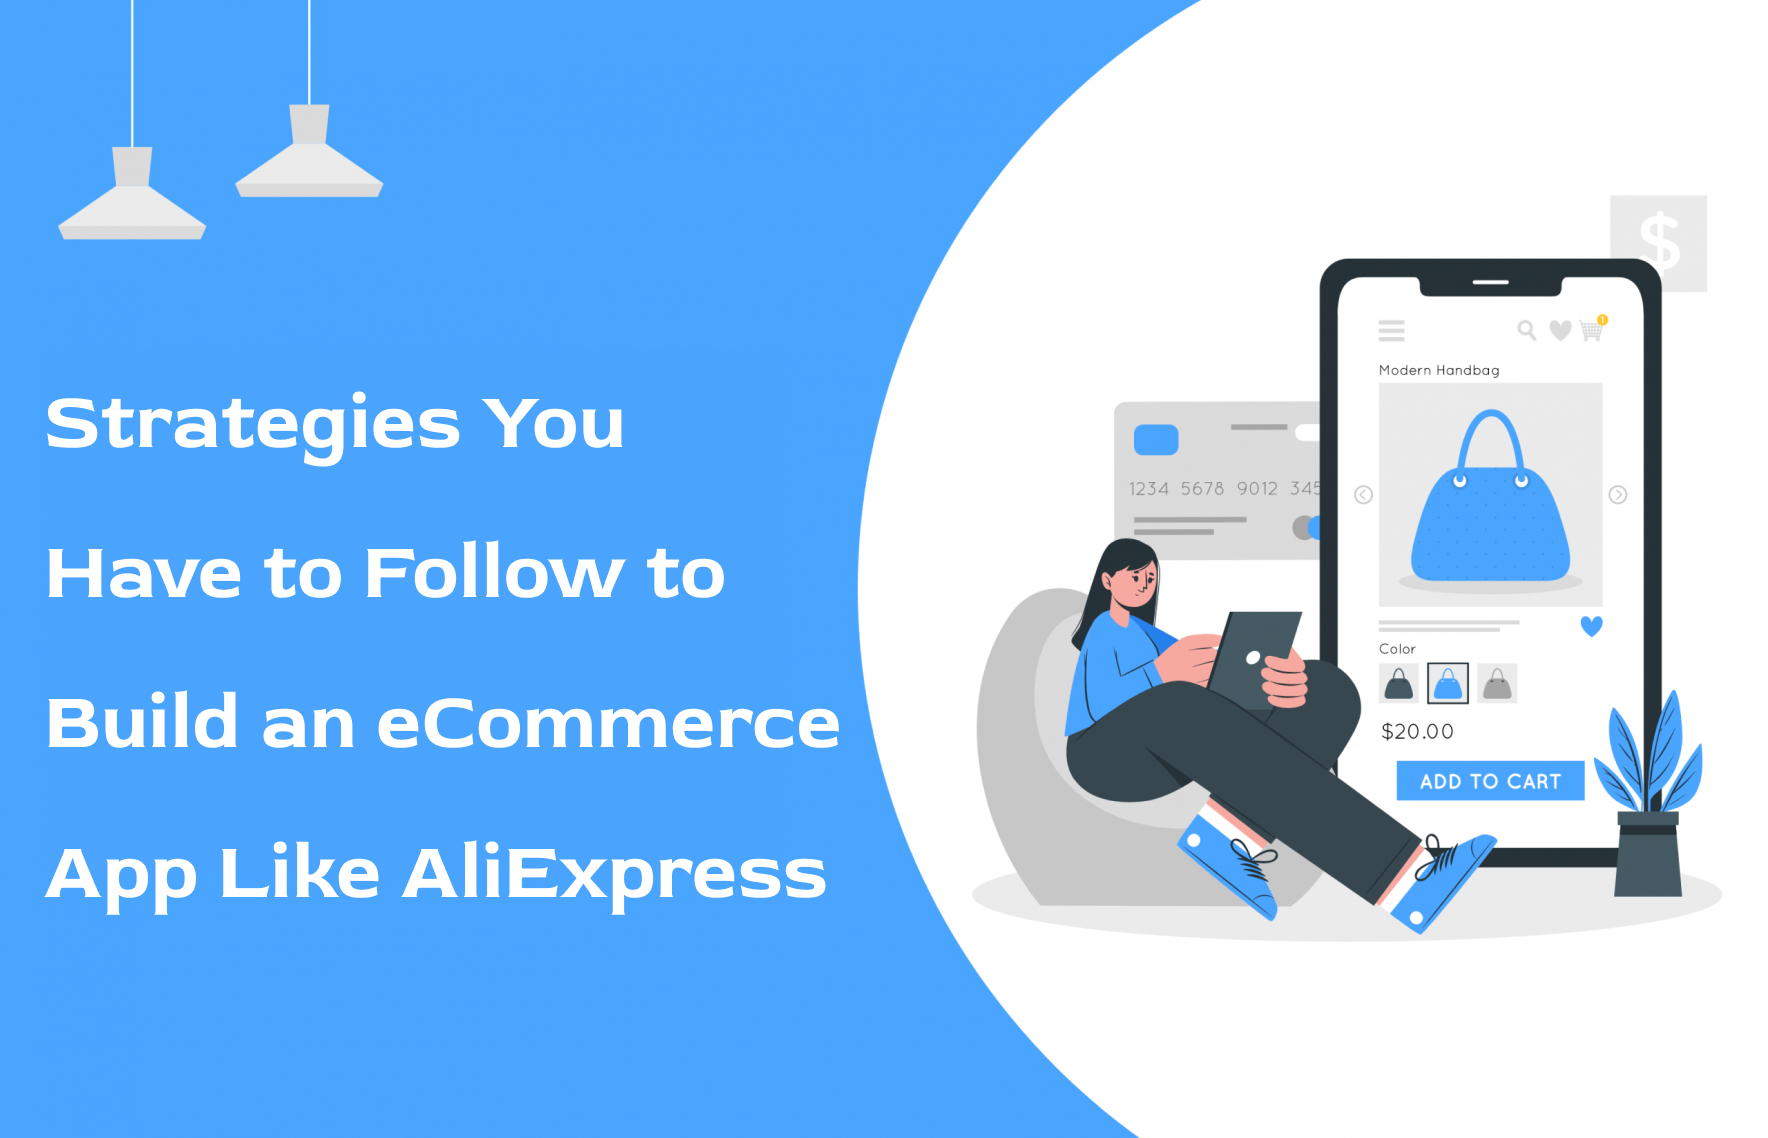 Strategies You Have to Follow to Build an eCommerce App Like AliExpress